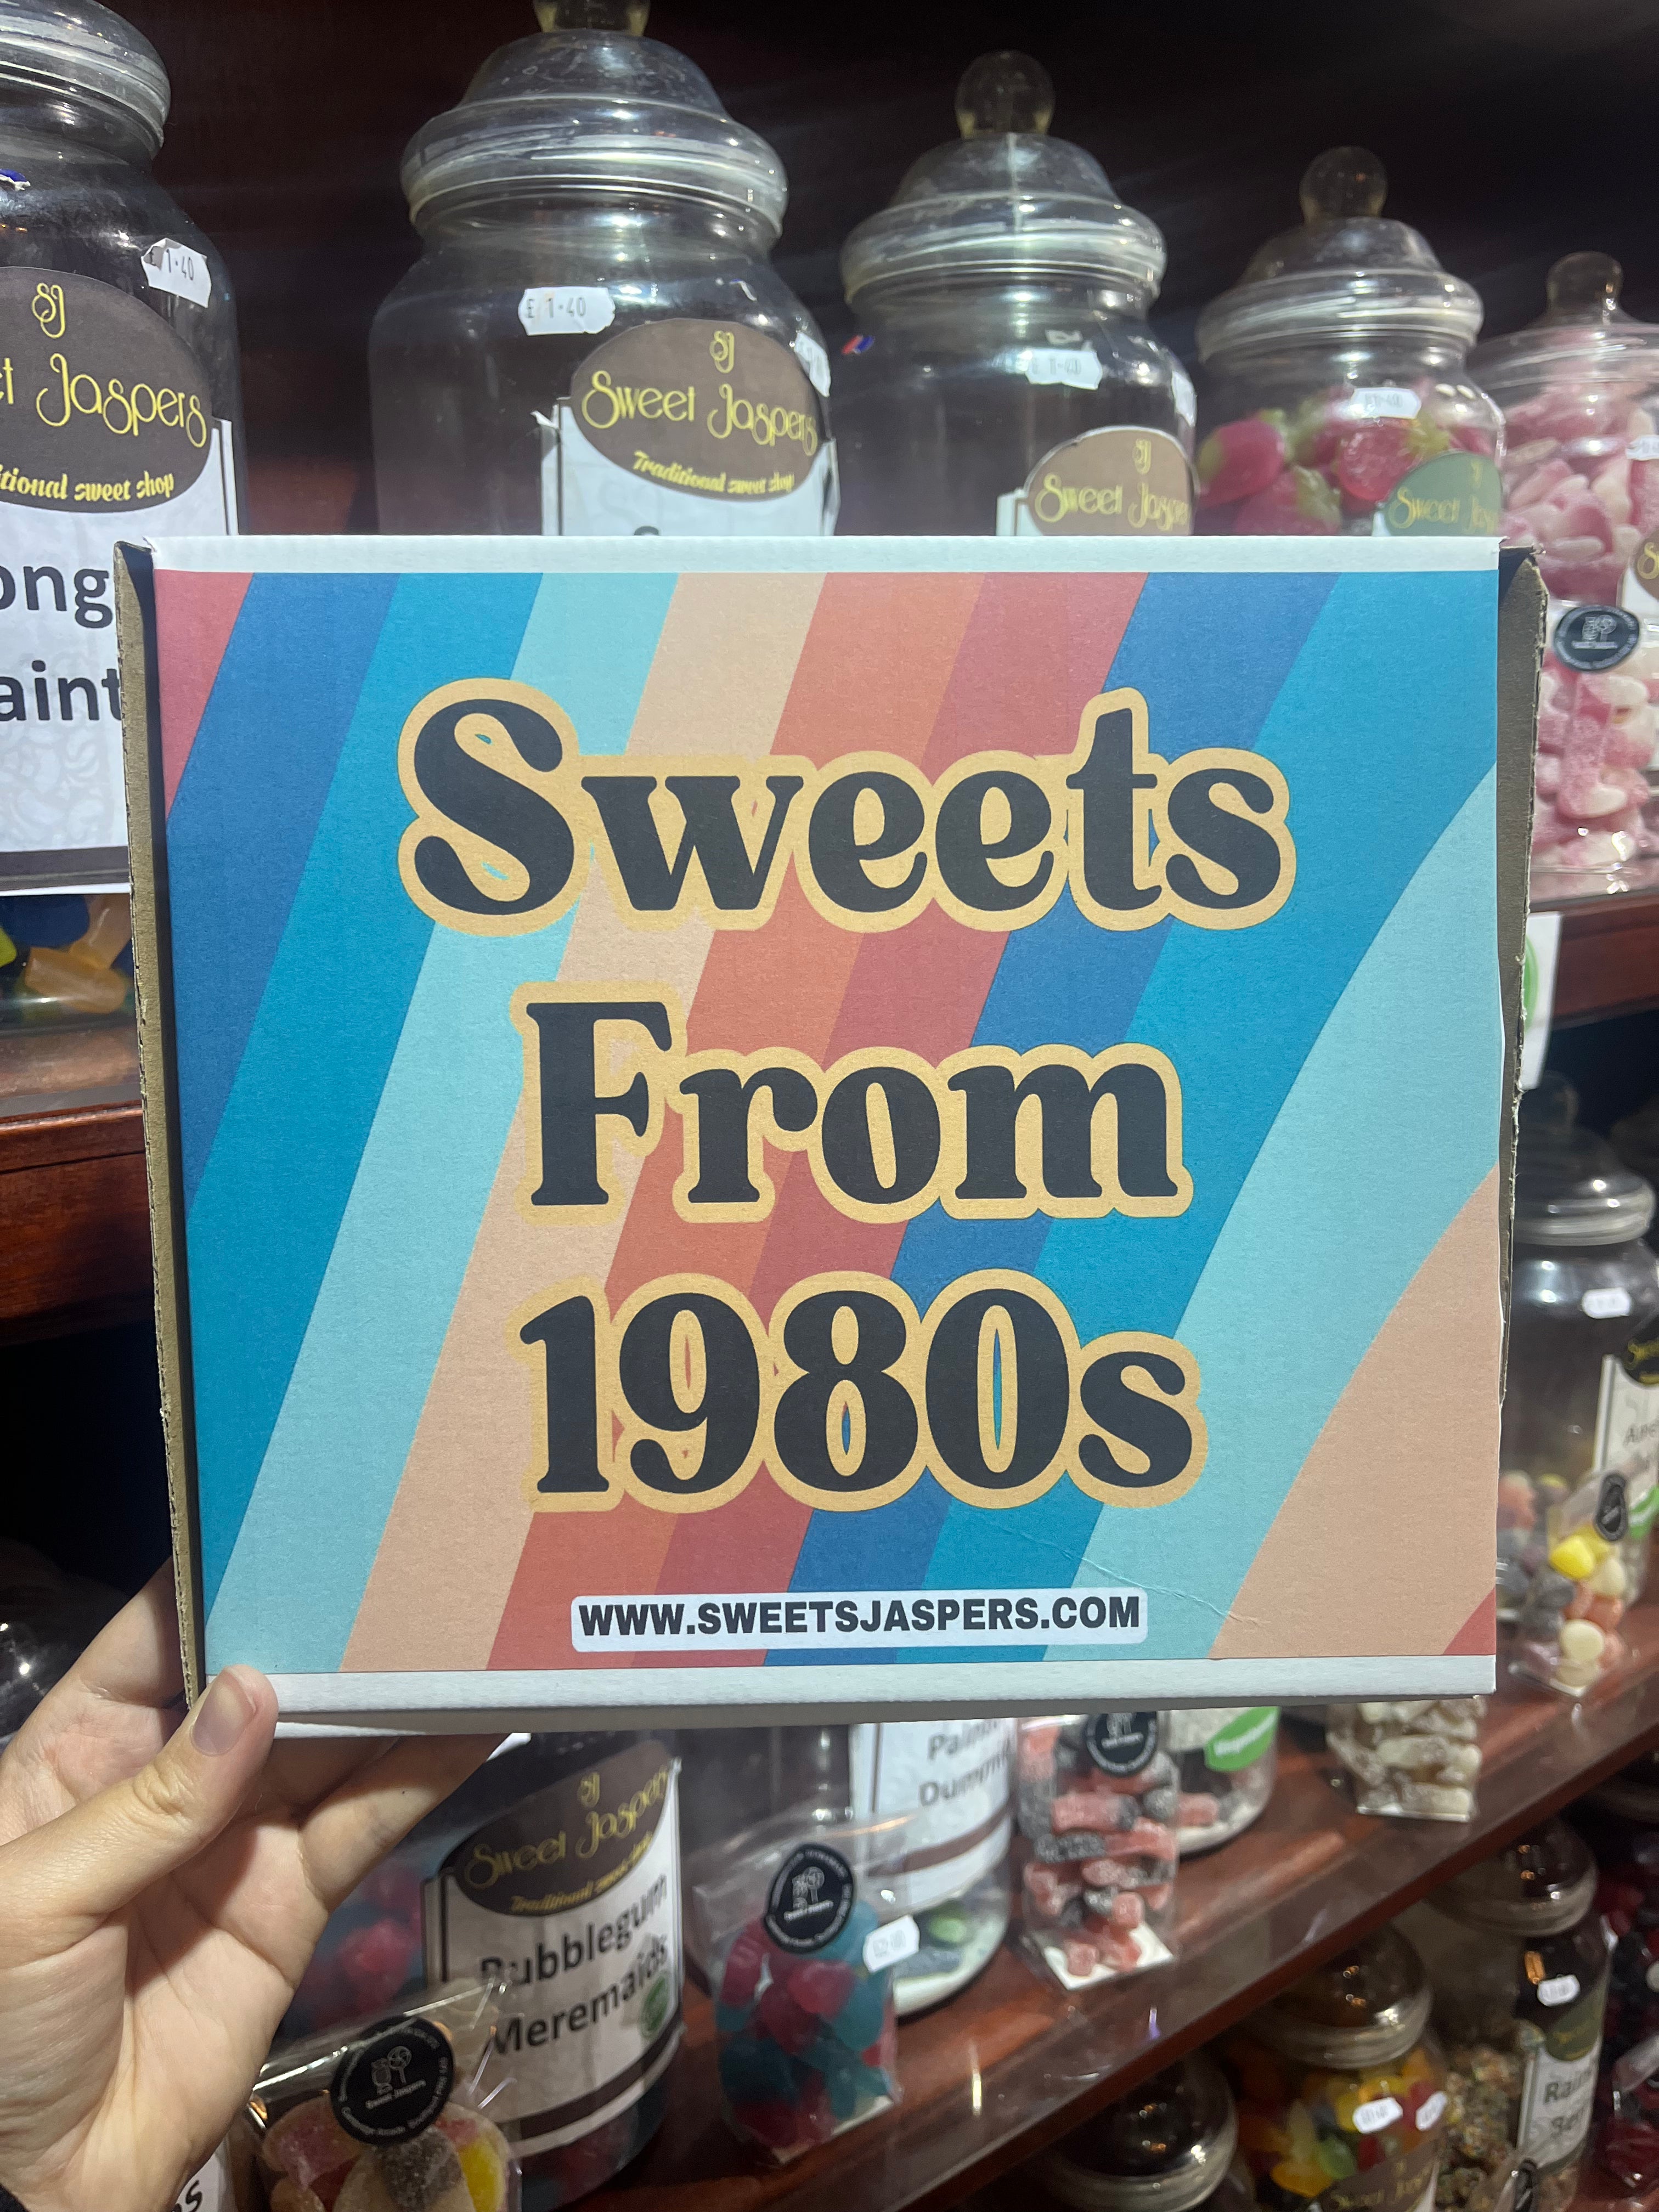 Sweets from 1980s